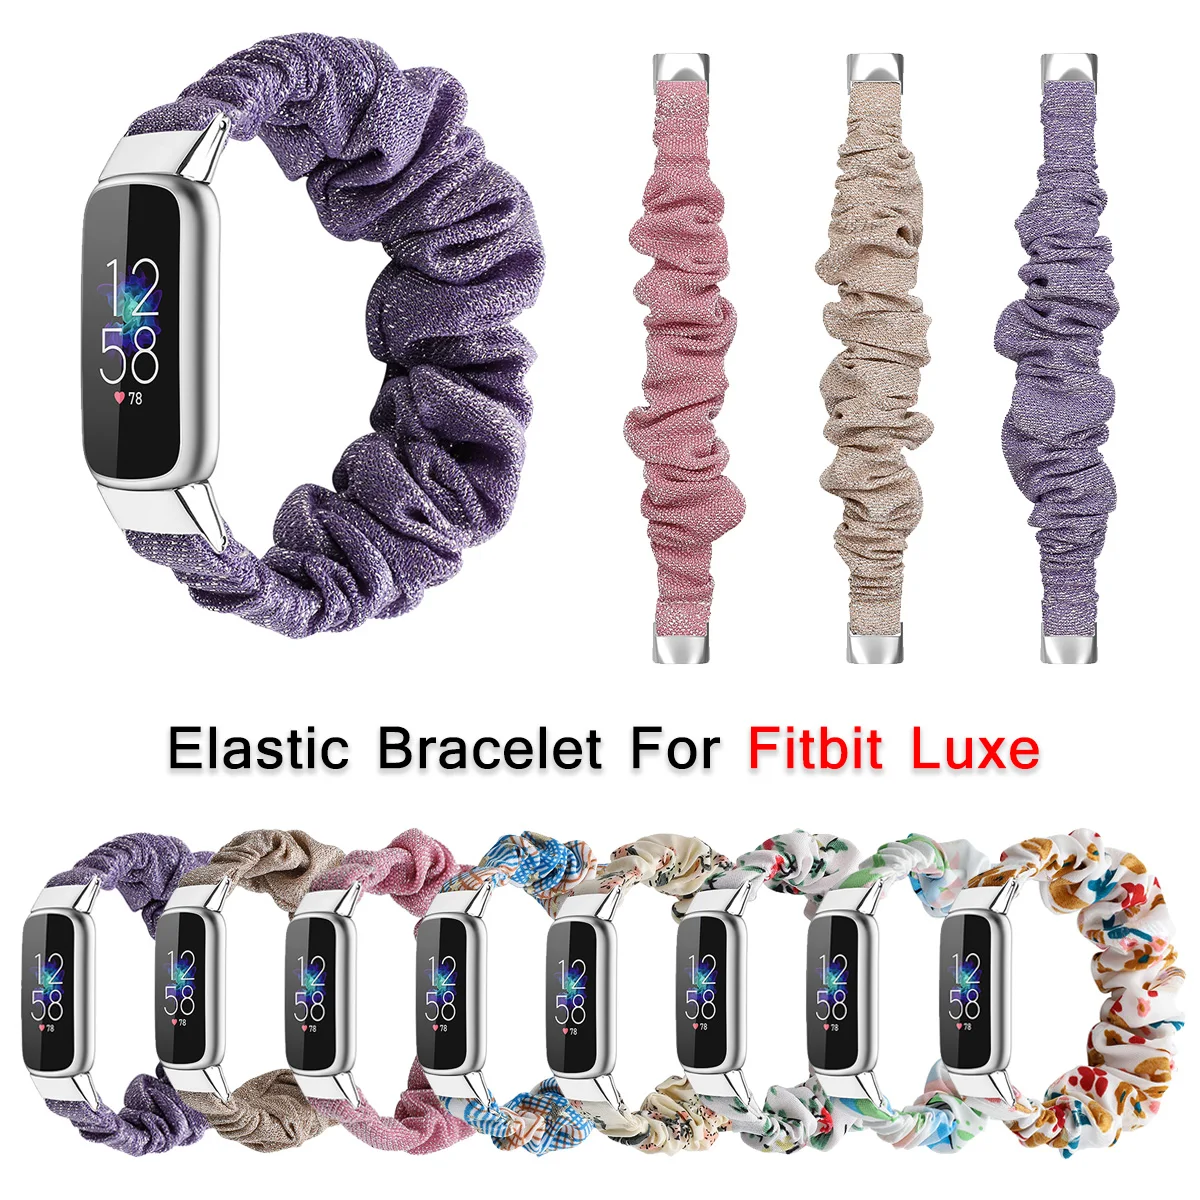 Elastic Band For Fitbit Luxe Strap For Fitbit Luxe Bracelet Smart Watch Accessories Women Wrist Sports Watchband Colorful Belt